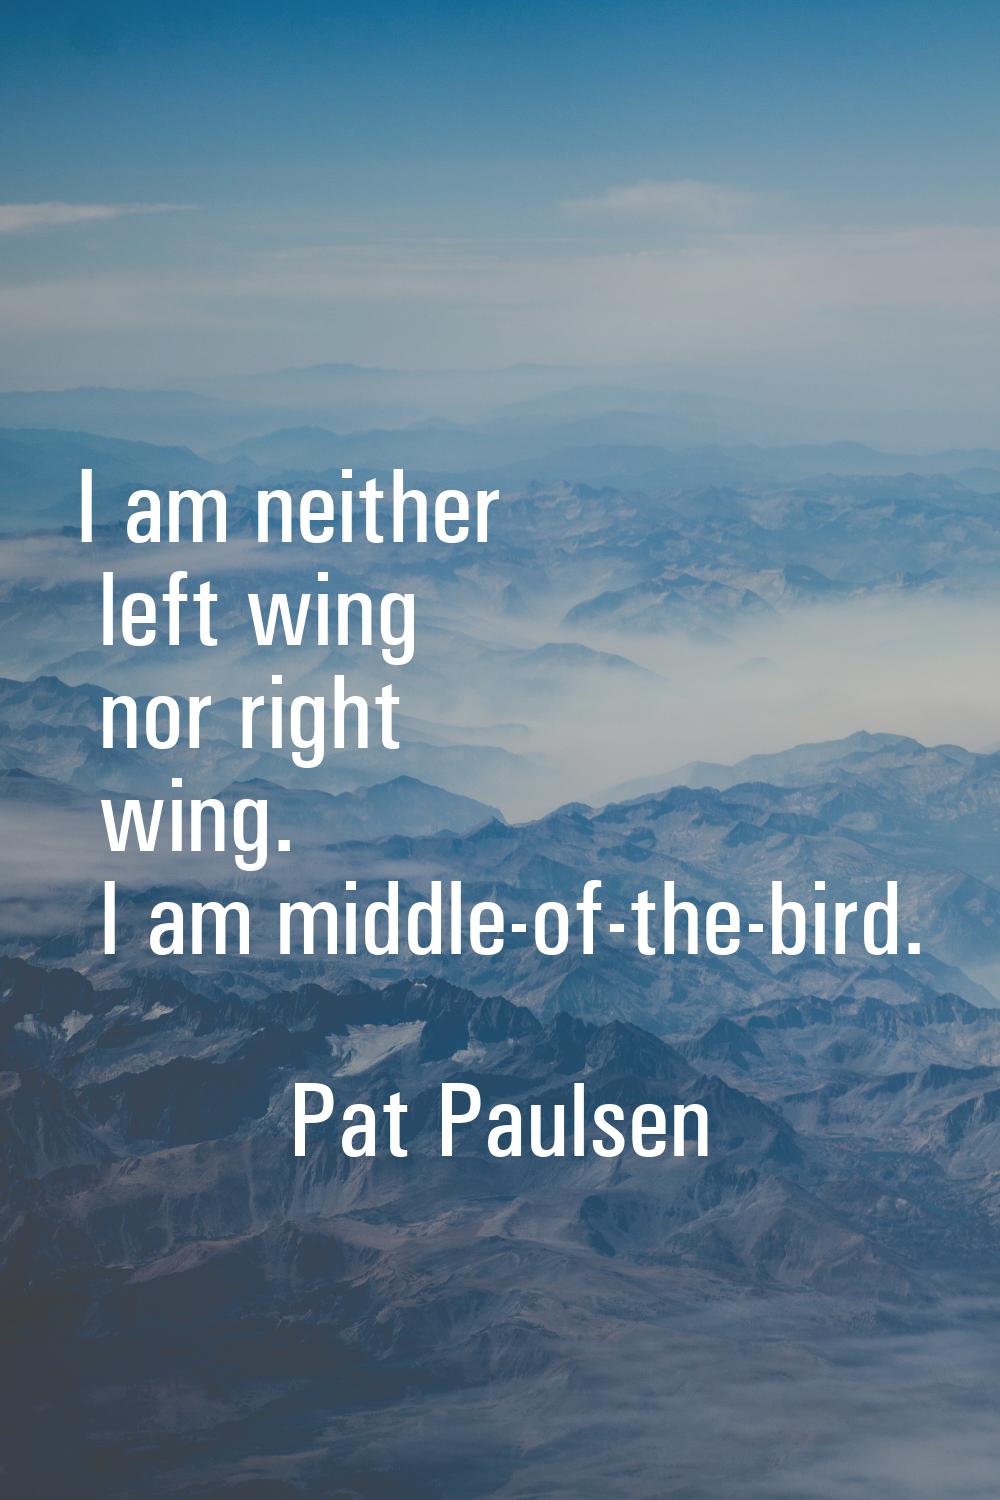 I am neither left wing nor right wing. I am middle-of-the-bird.